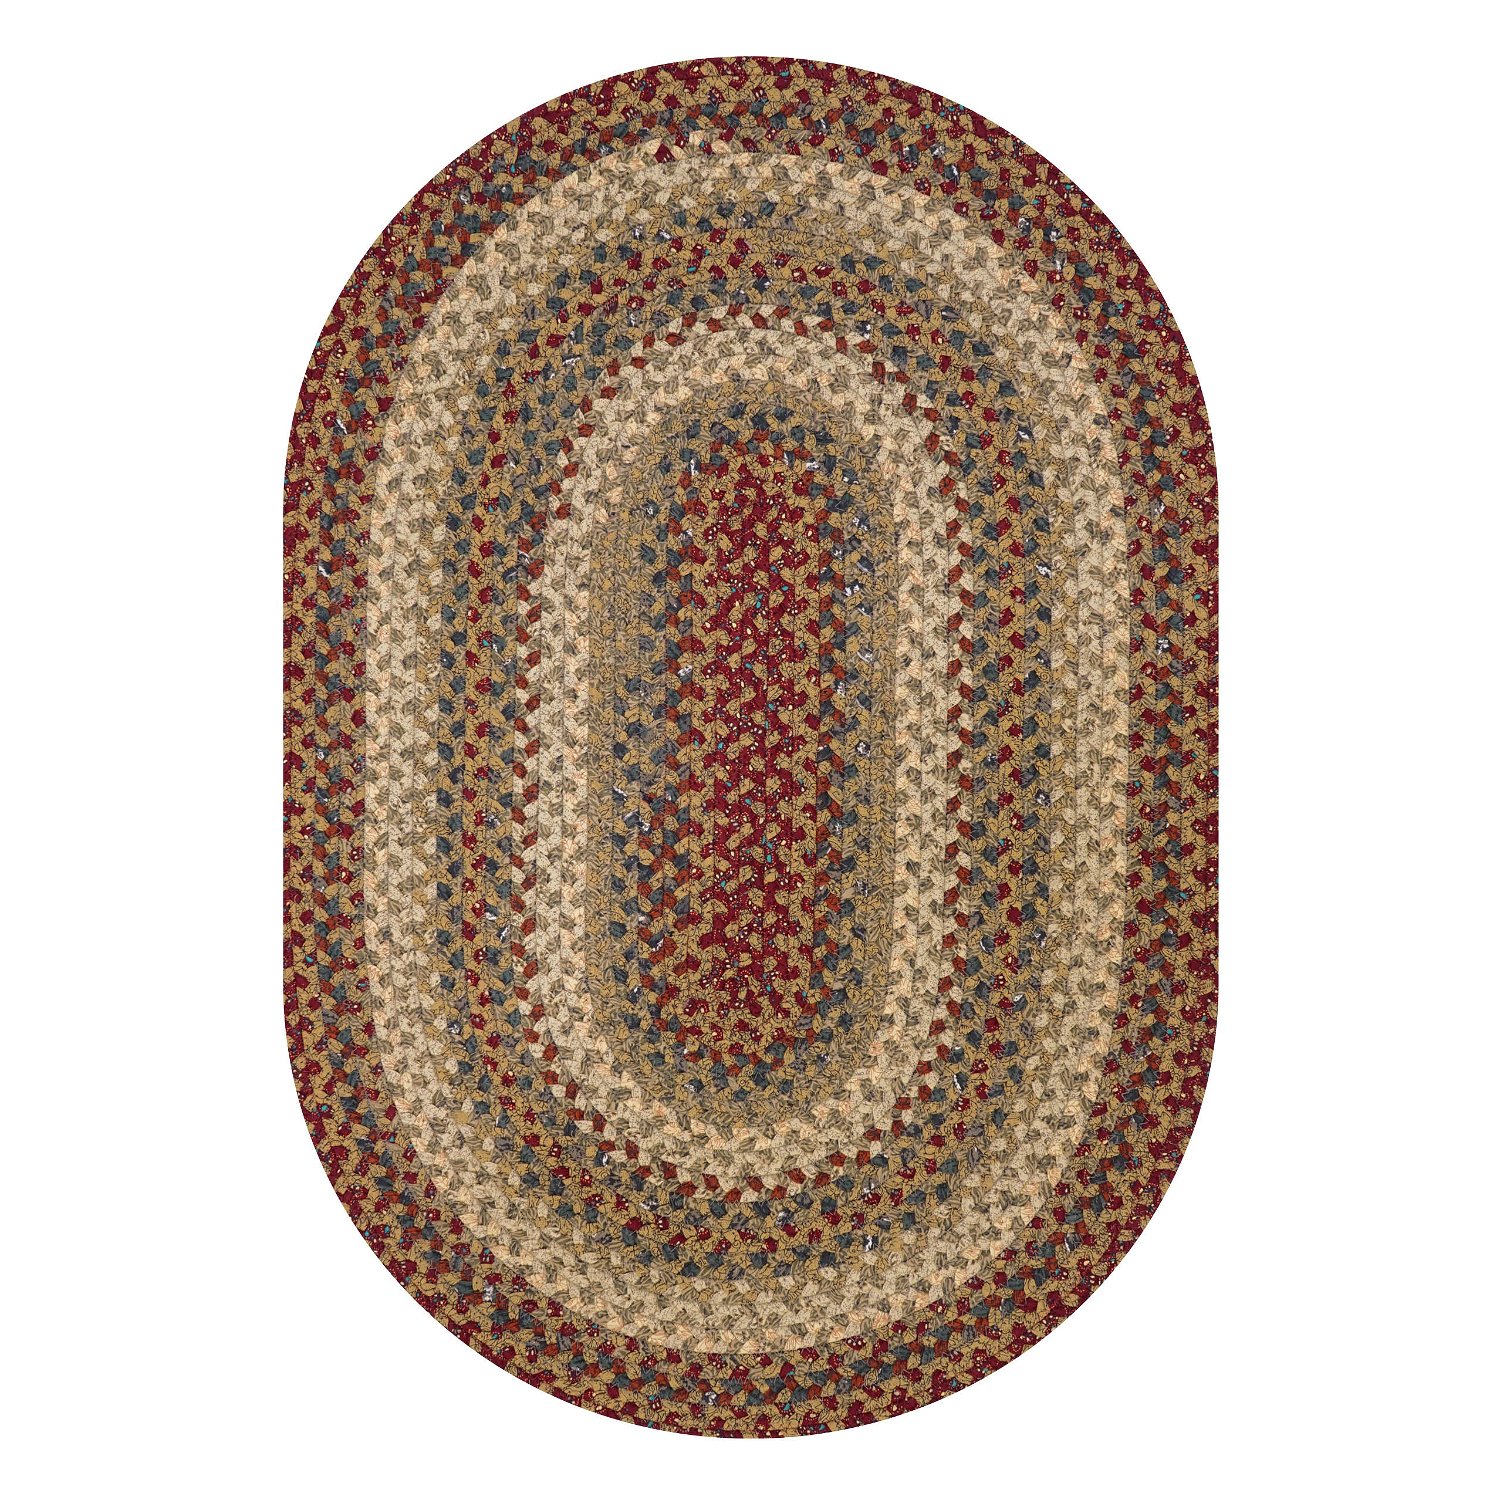 Pumpkin Pie Red-Green-Brown Oval Cotton Braided Rugs Reversible